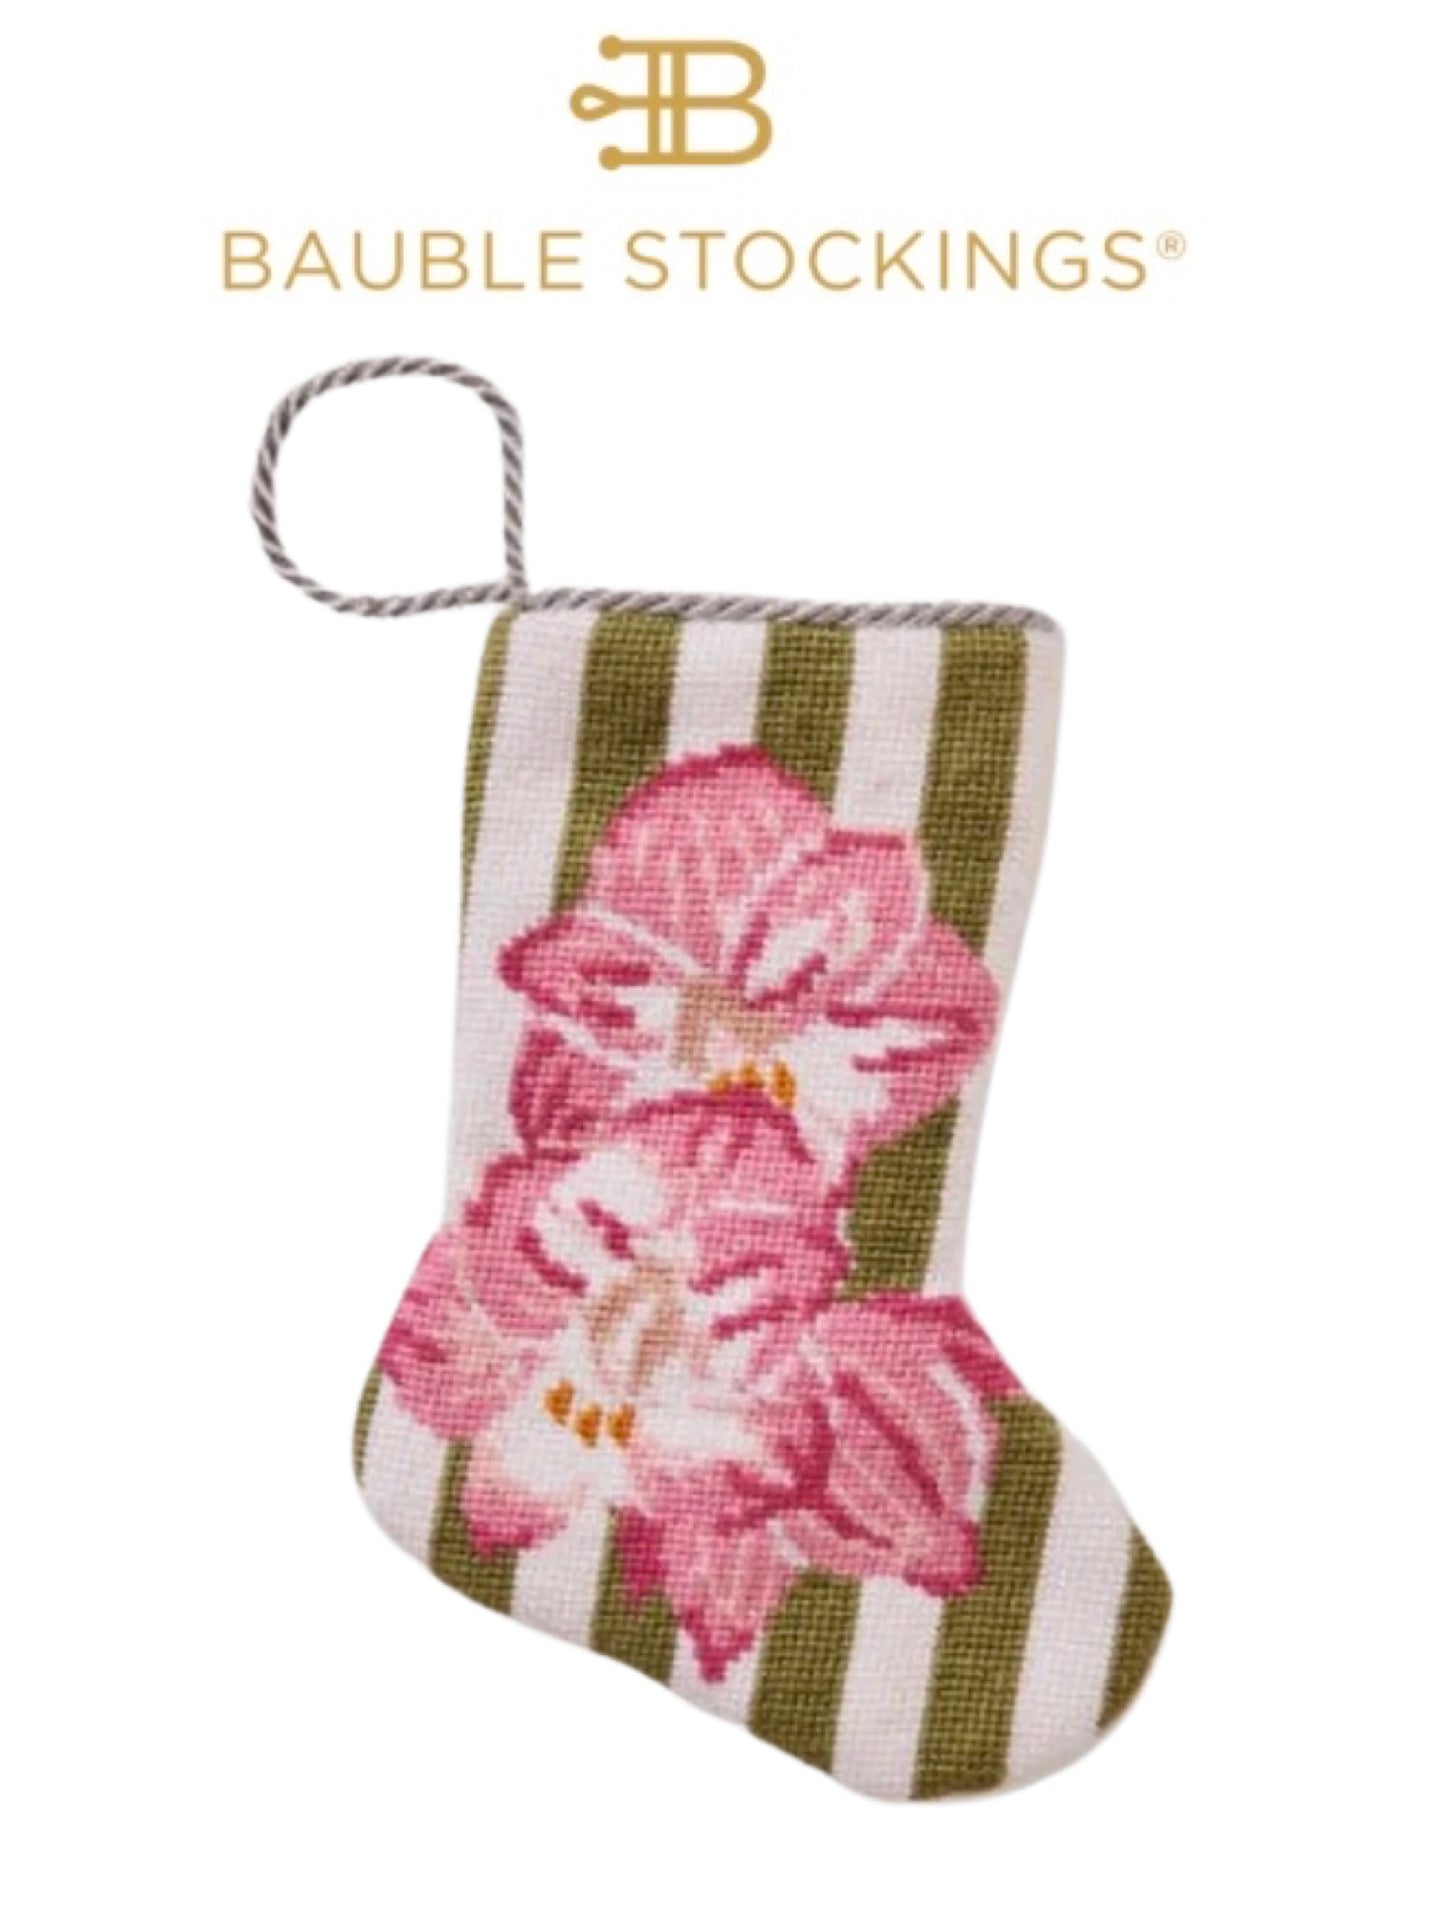 Bauble Stockings: now in store!